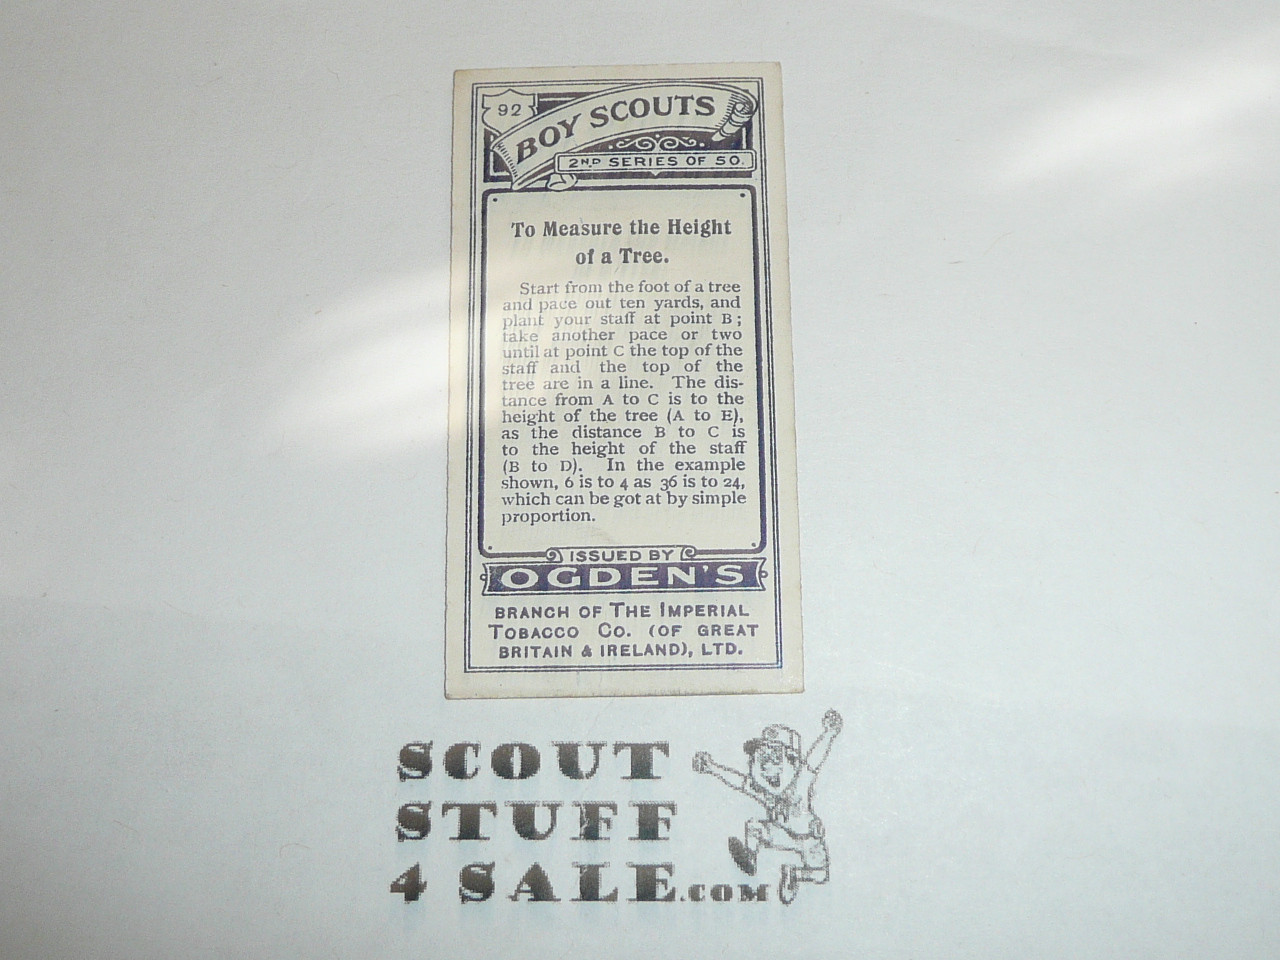 Ogden Tabacco Company Premium Card, Second Boy Scout Series of 50 (Blue Backs), Card #92 To Measure the Height of a Tree, 1912